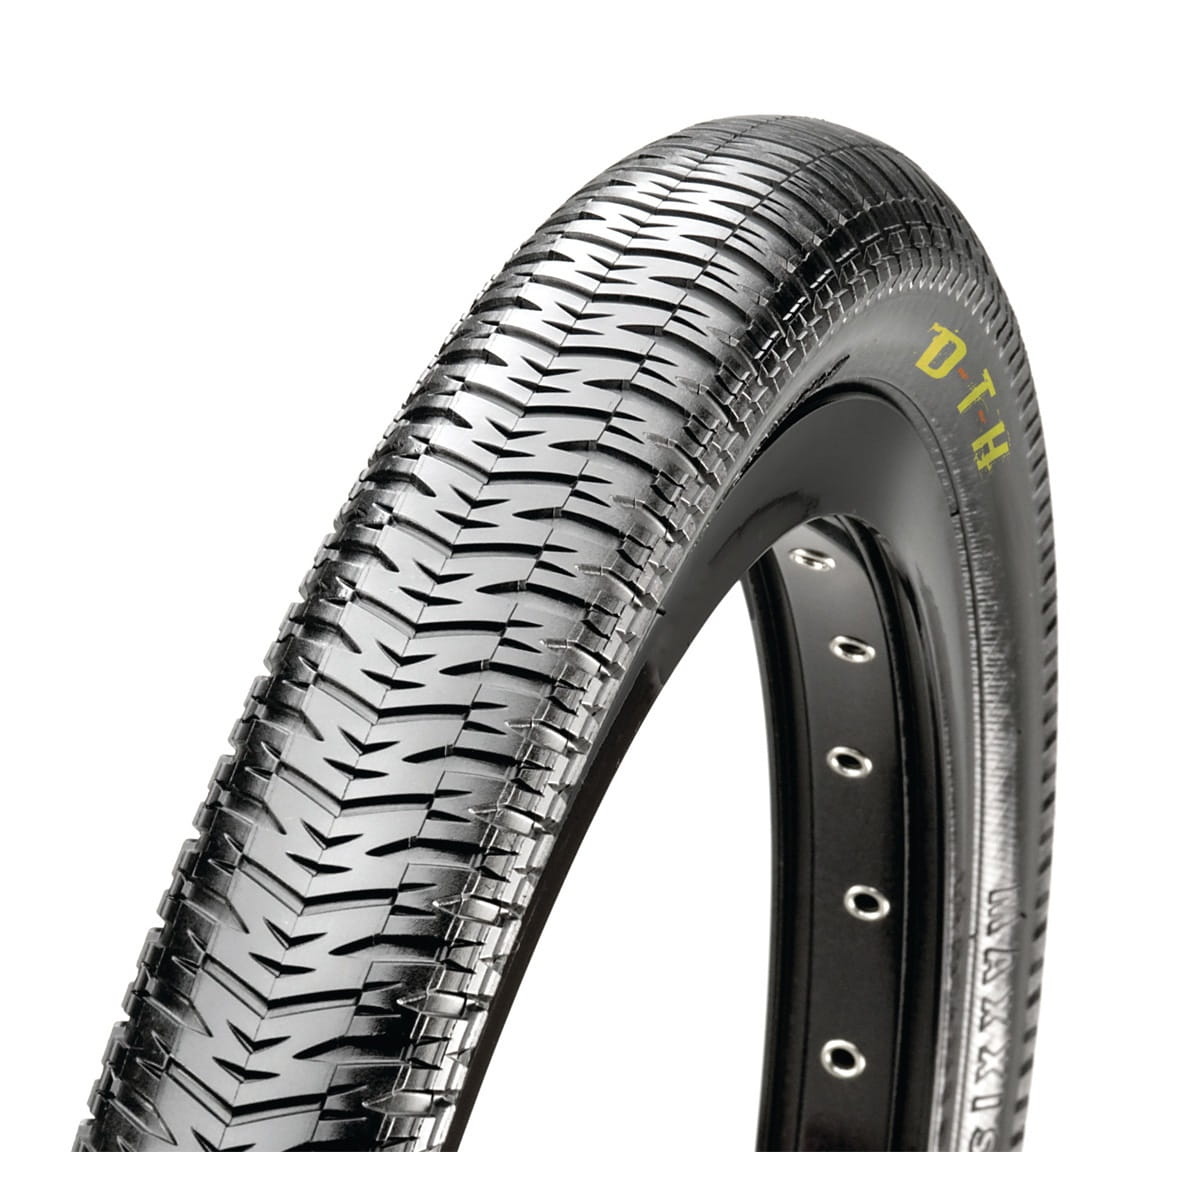 high pressure 20 inch bicycle tires